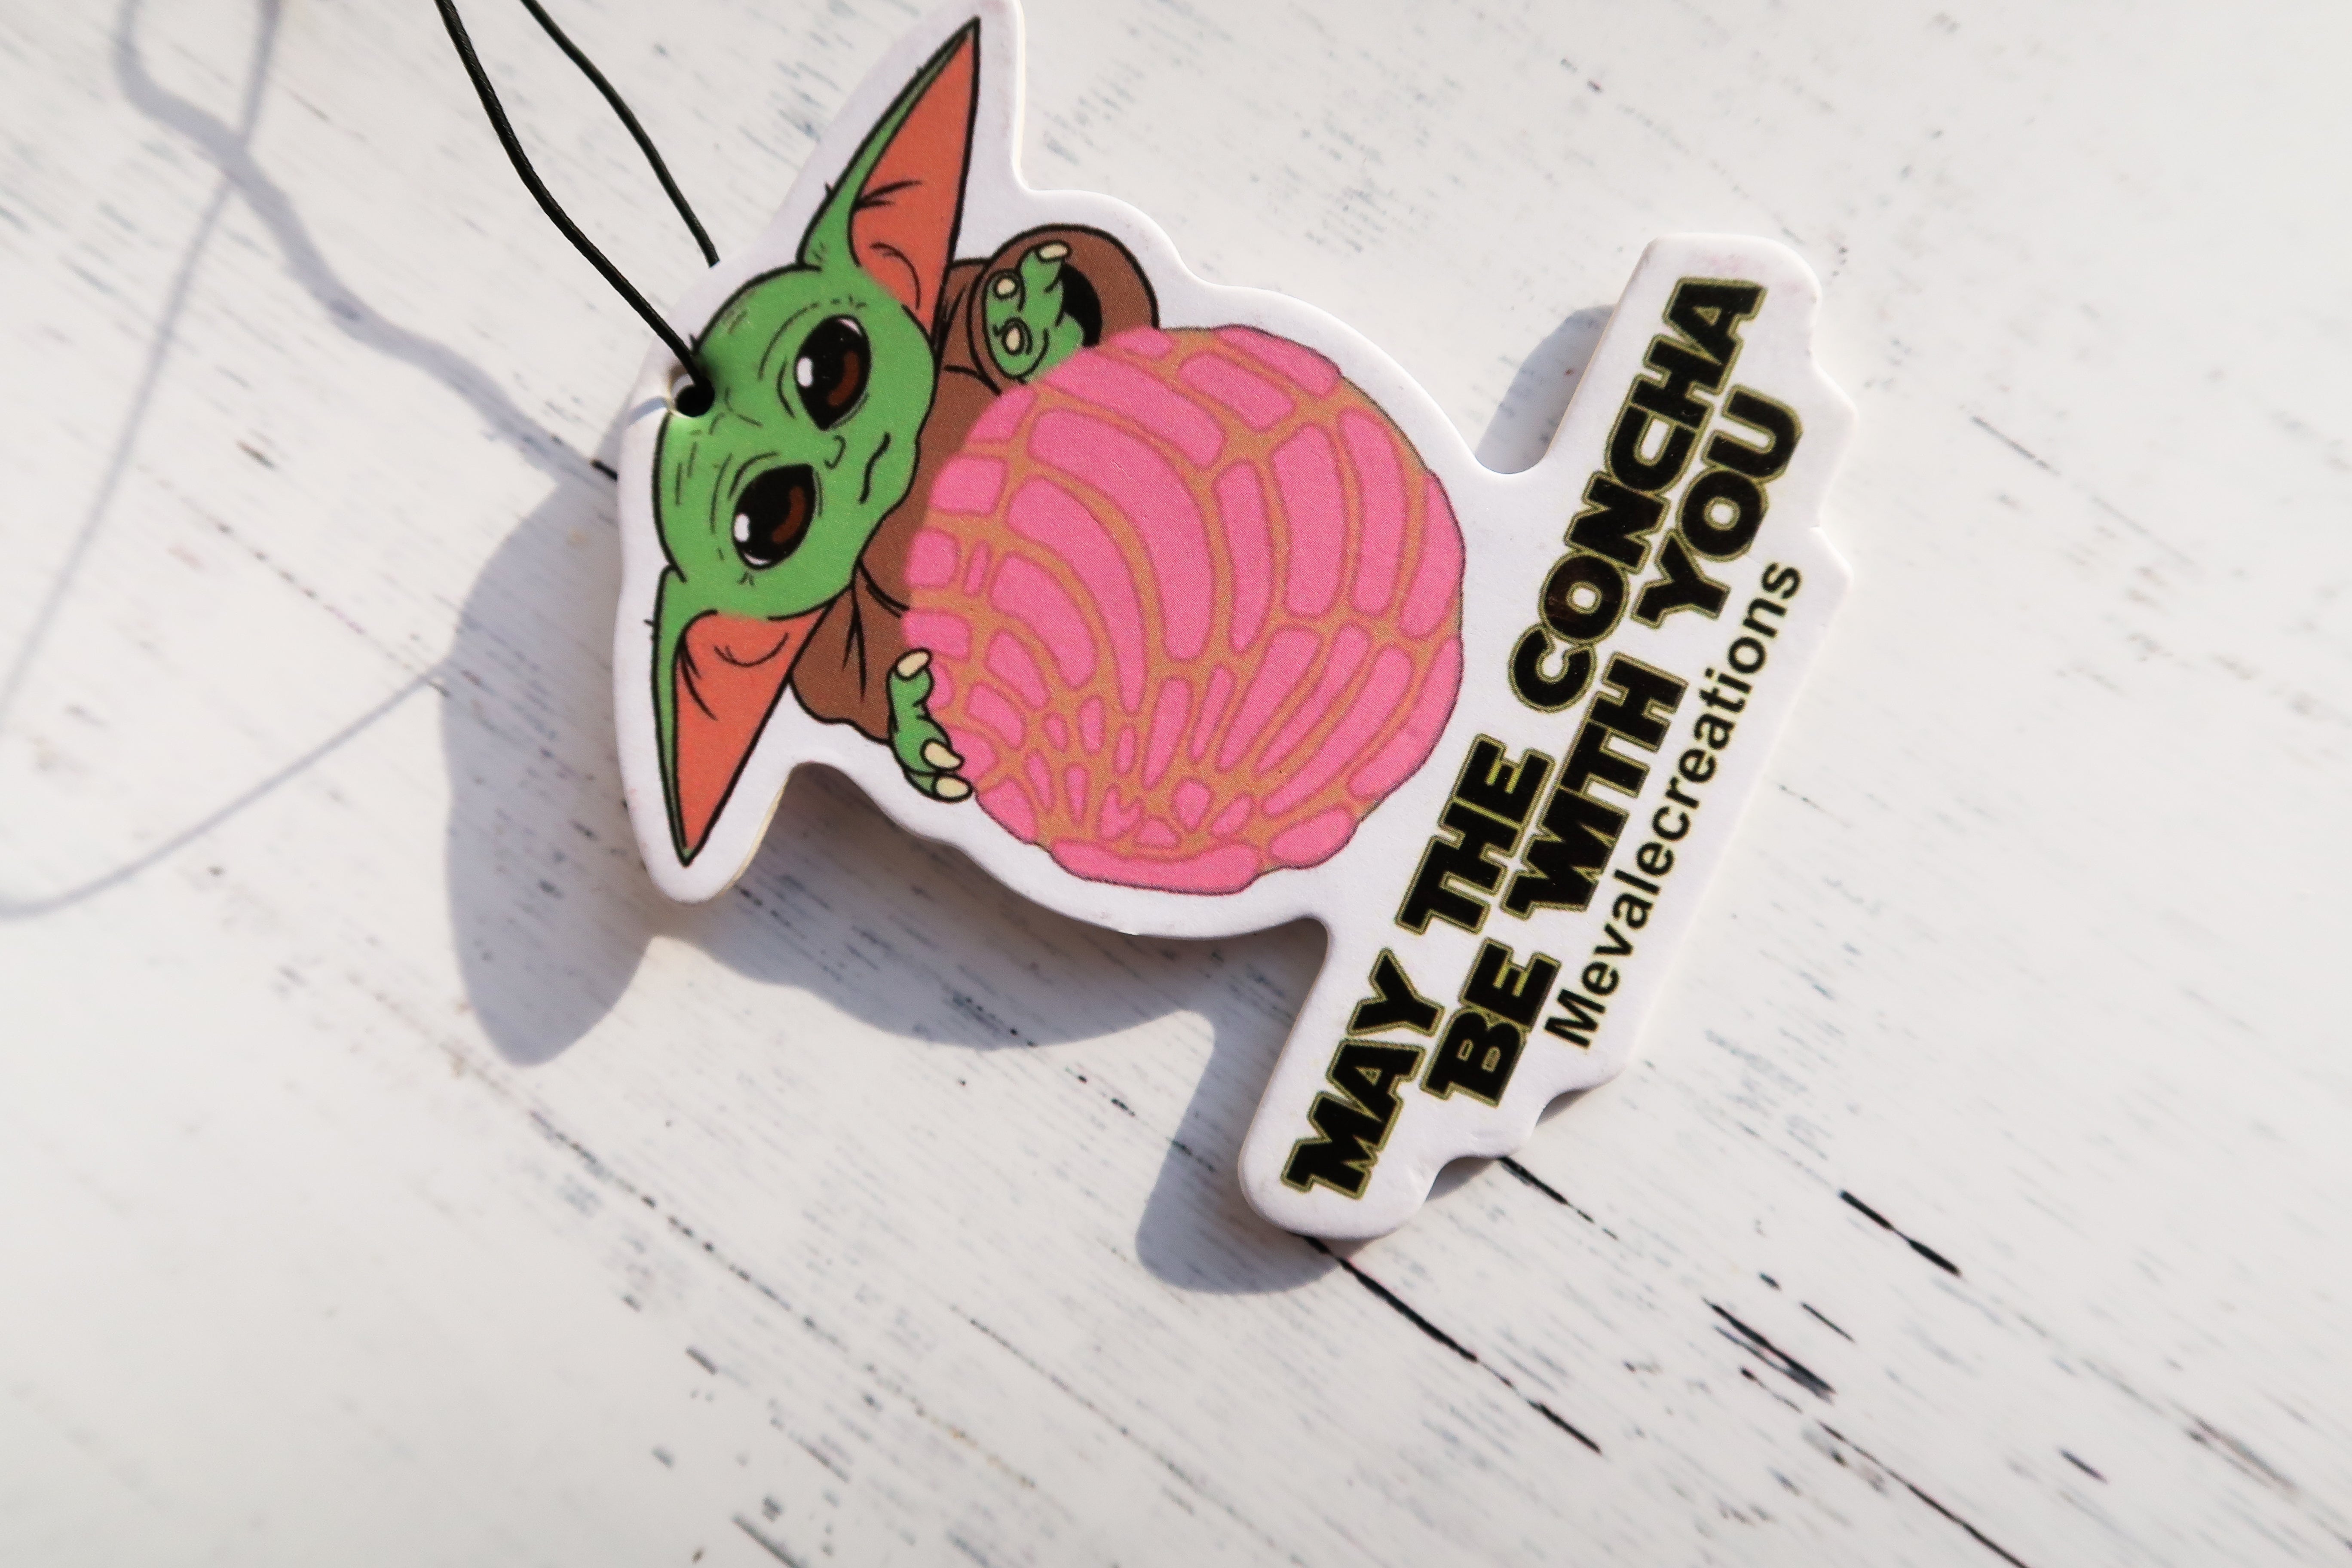 Air Freshener - "May The Concha Be W/You"